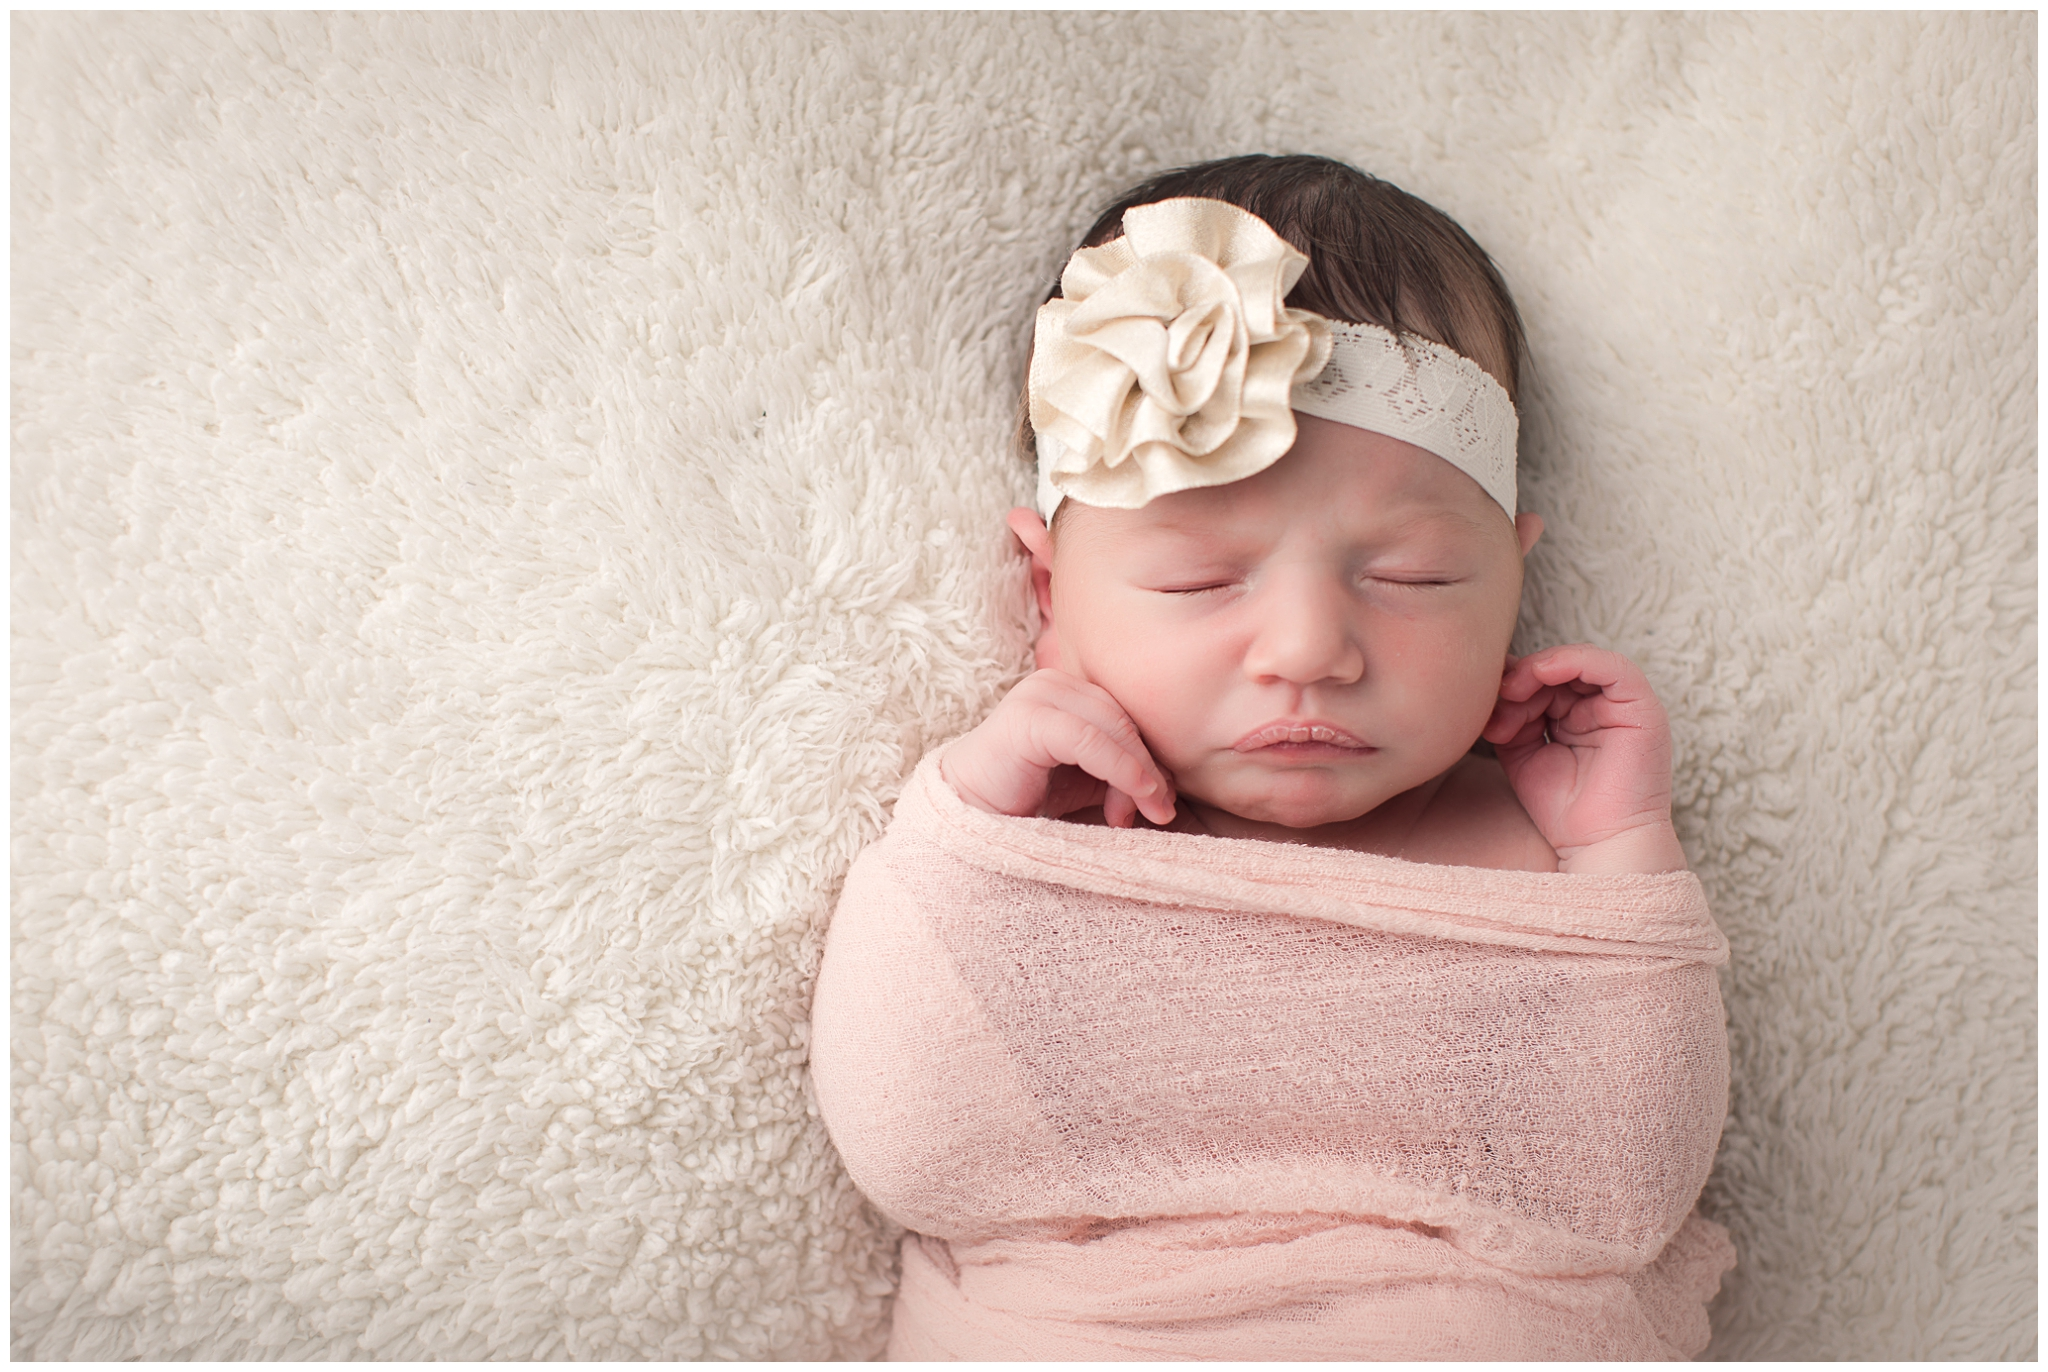 Berks County Reading PA Newborn Family Siblings Photography Photographer Photo